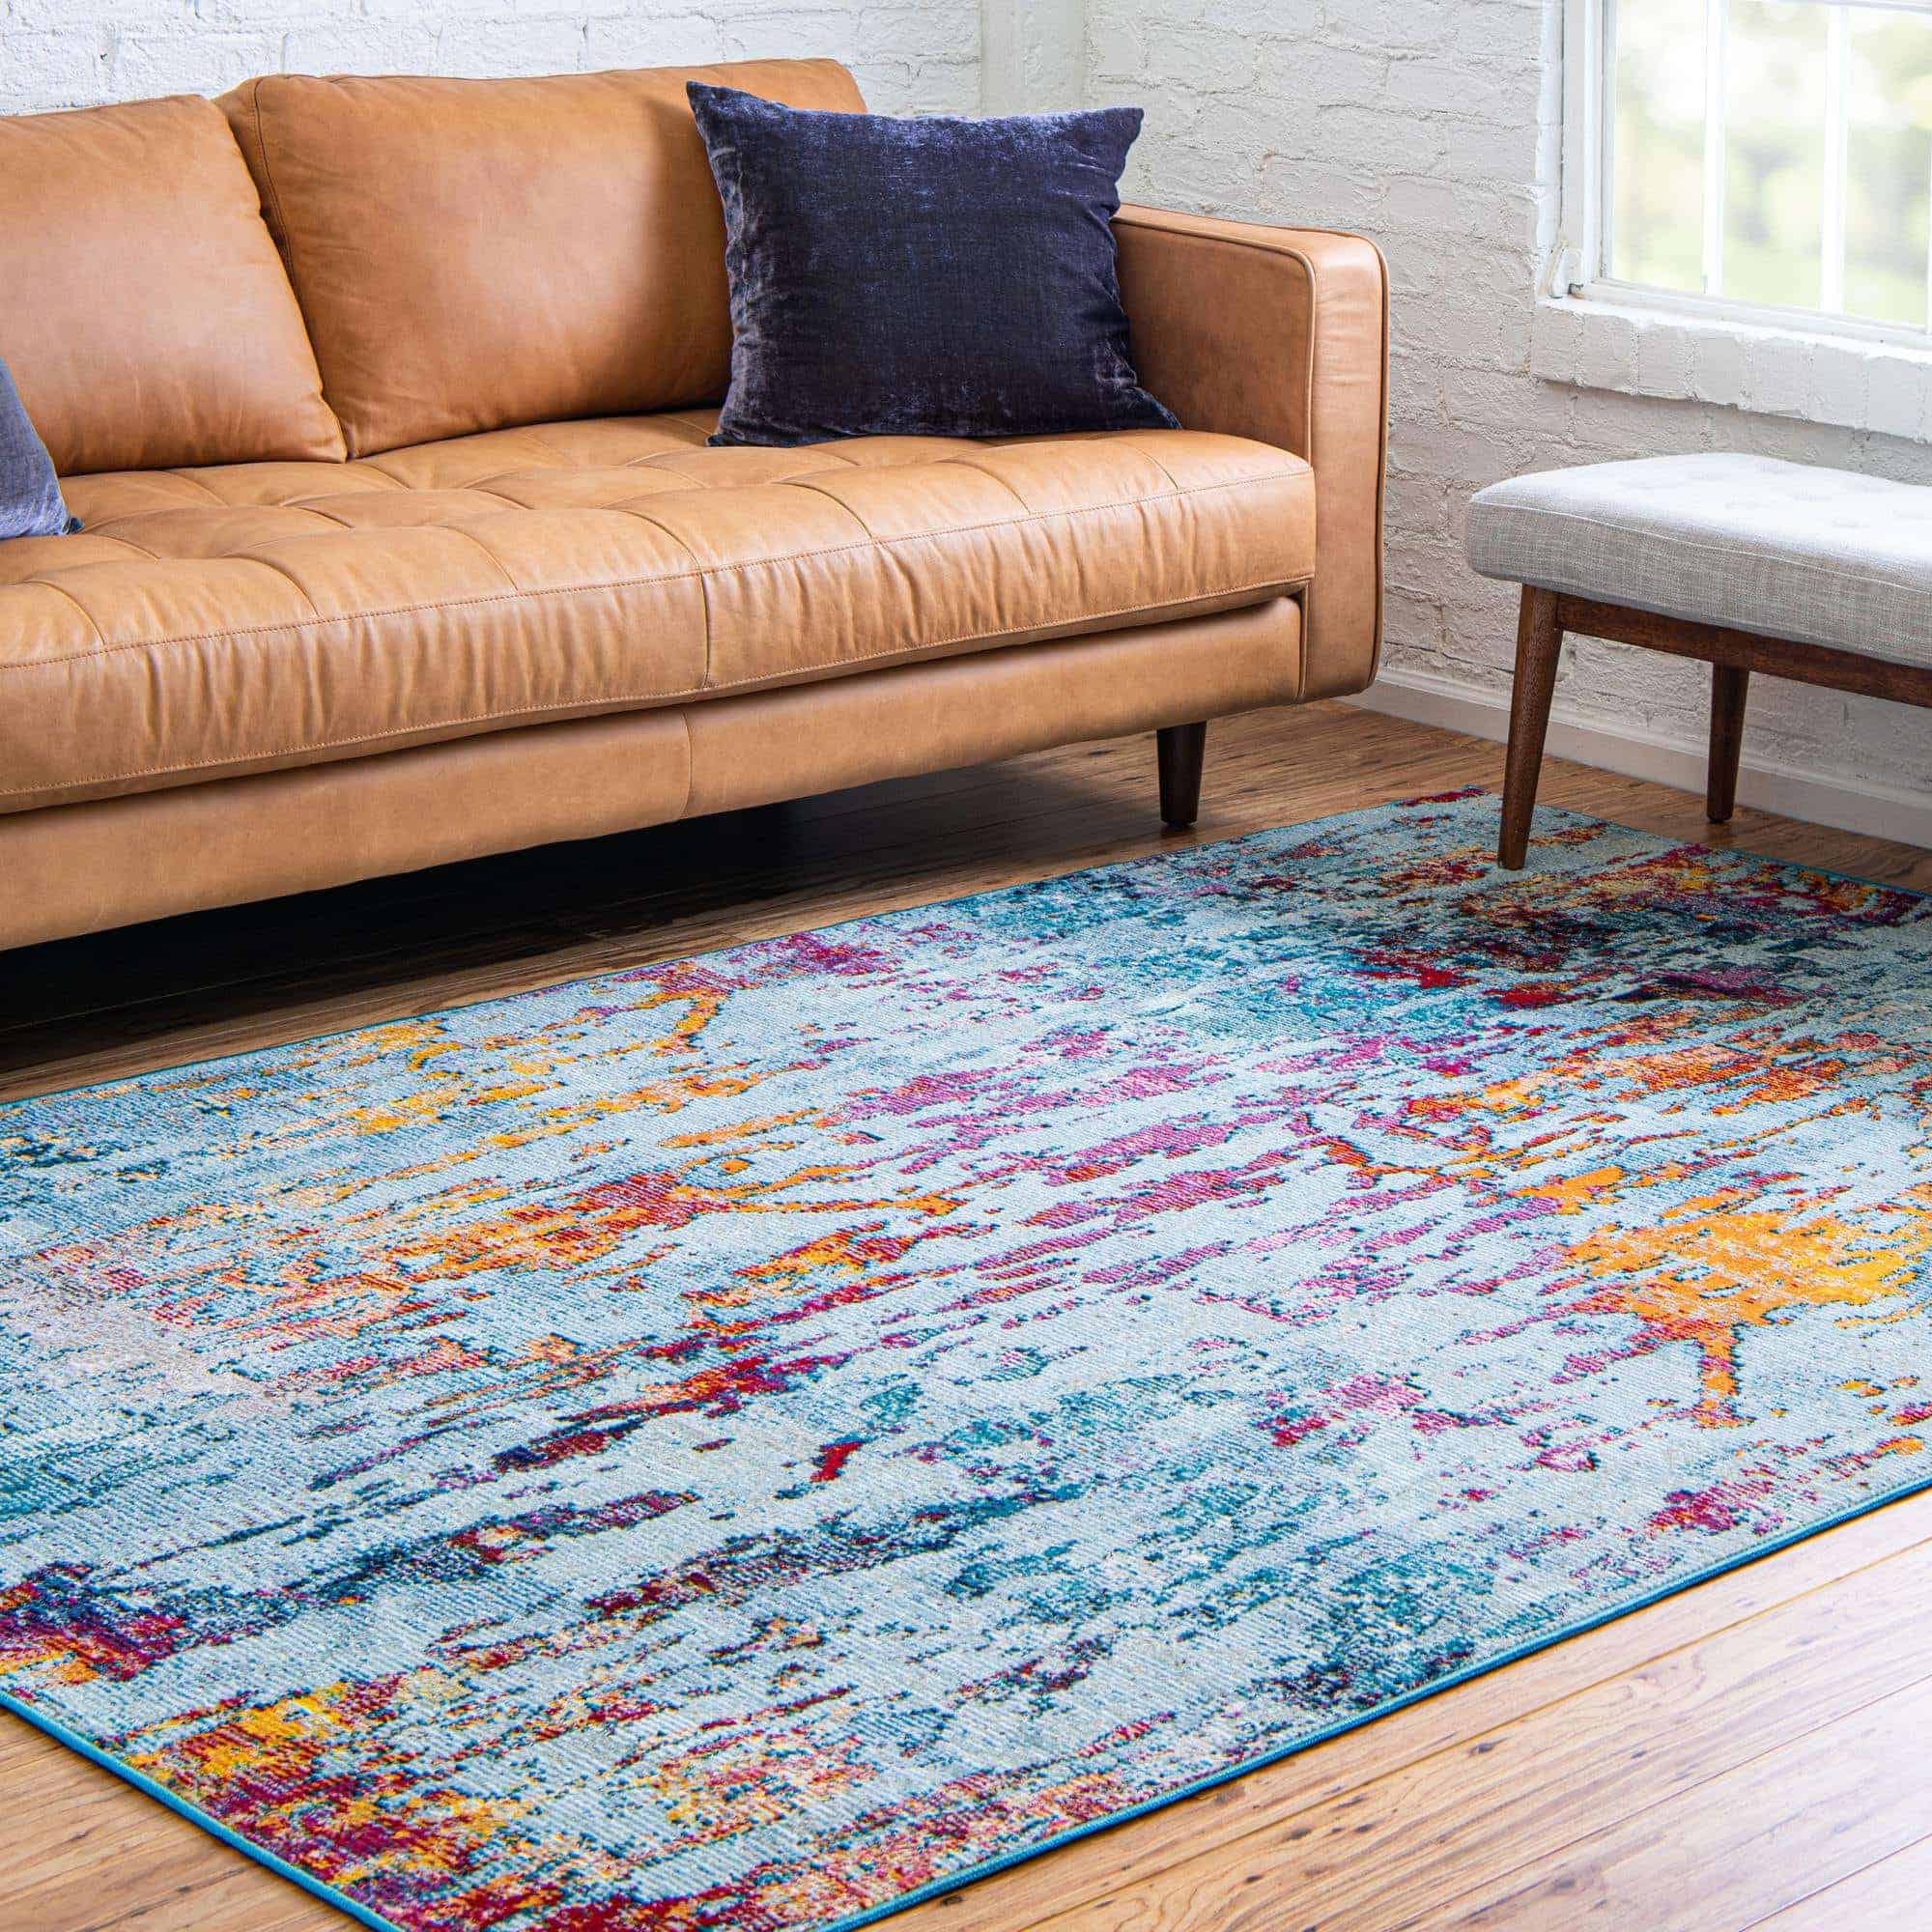 21 Stylish Rugs That Go With Brown Couches, Area Rugs That Go With Brown Leather Furniture